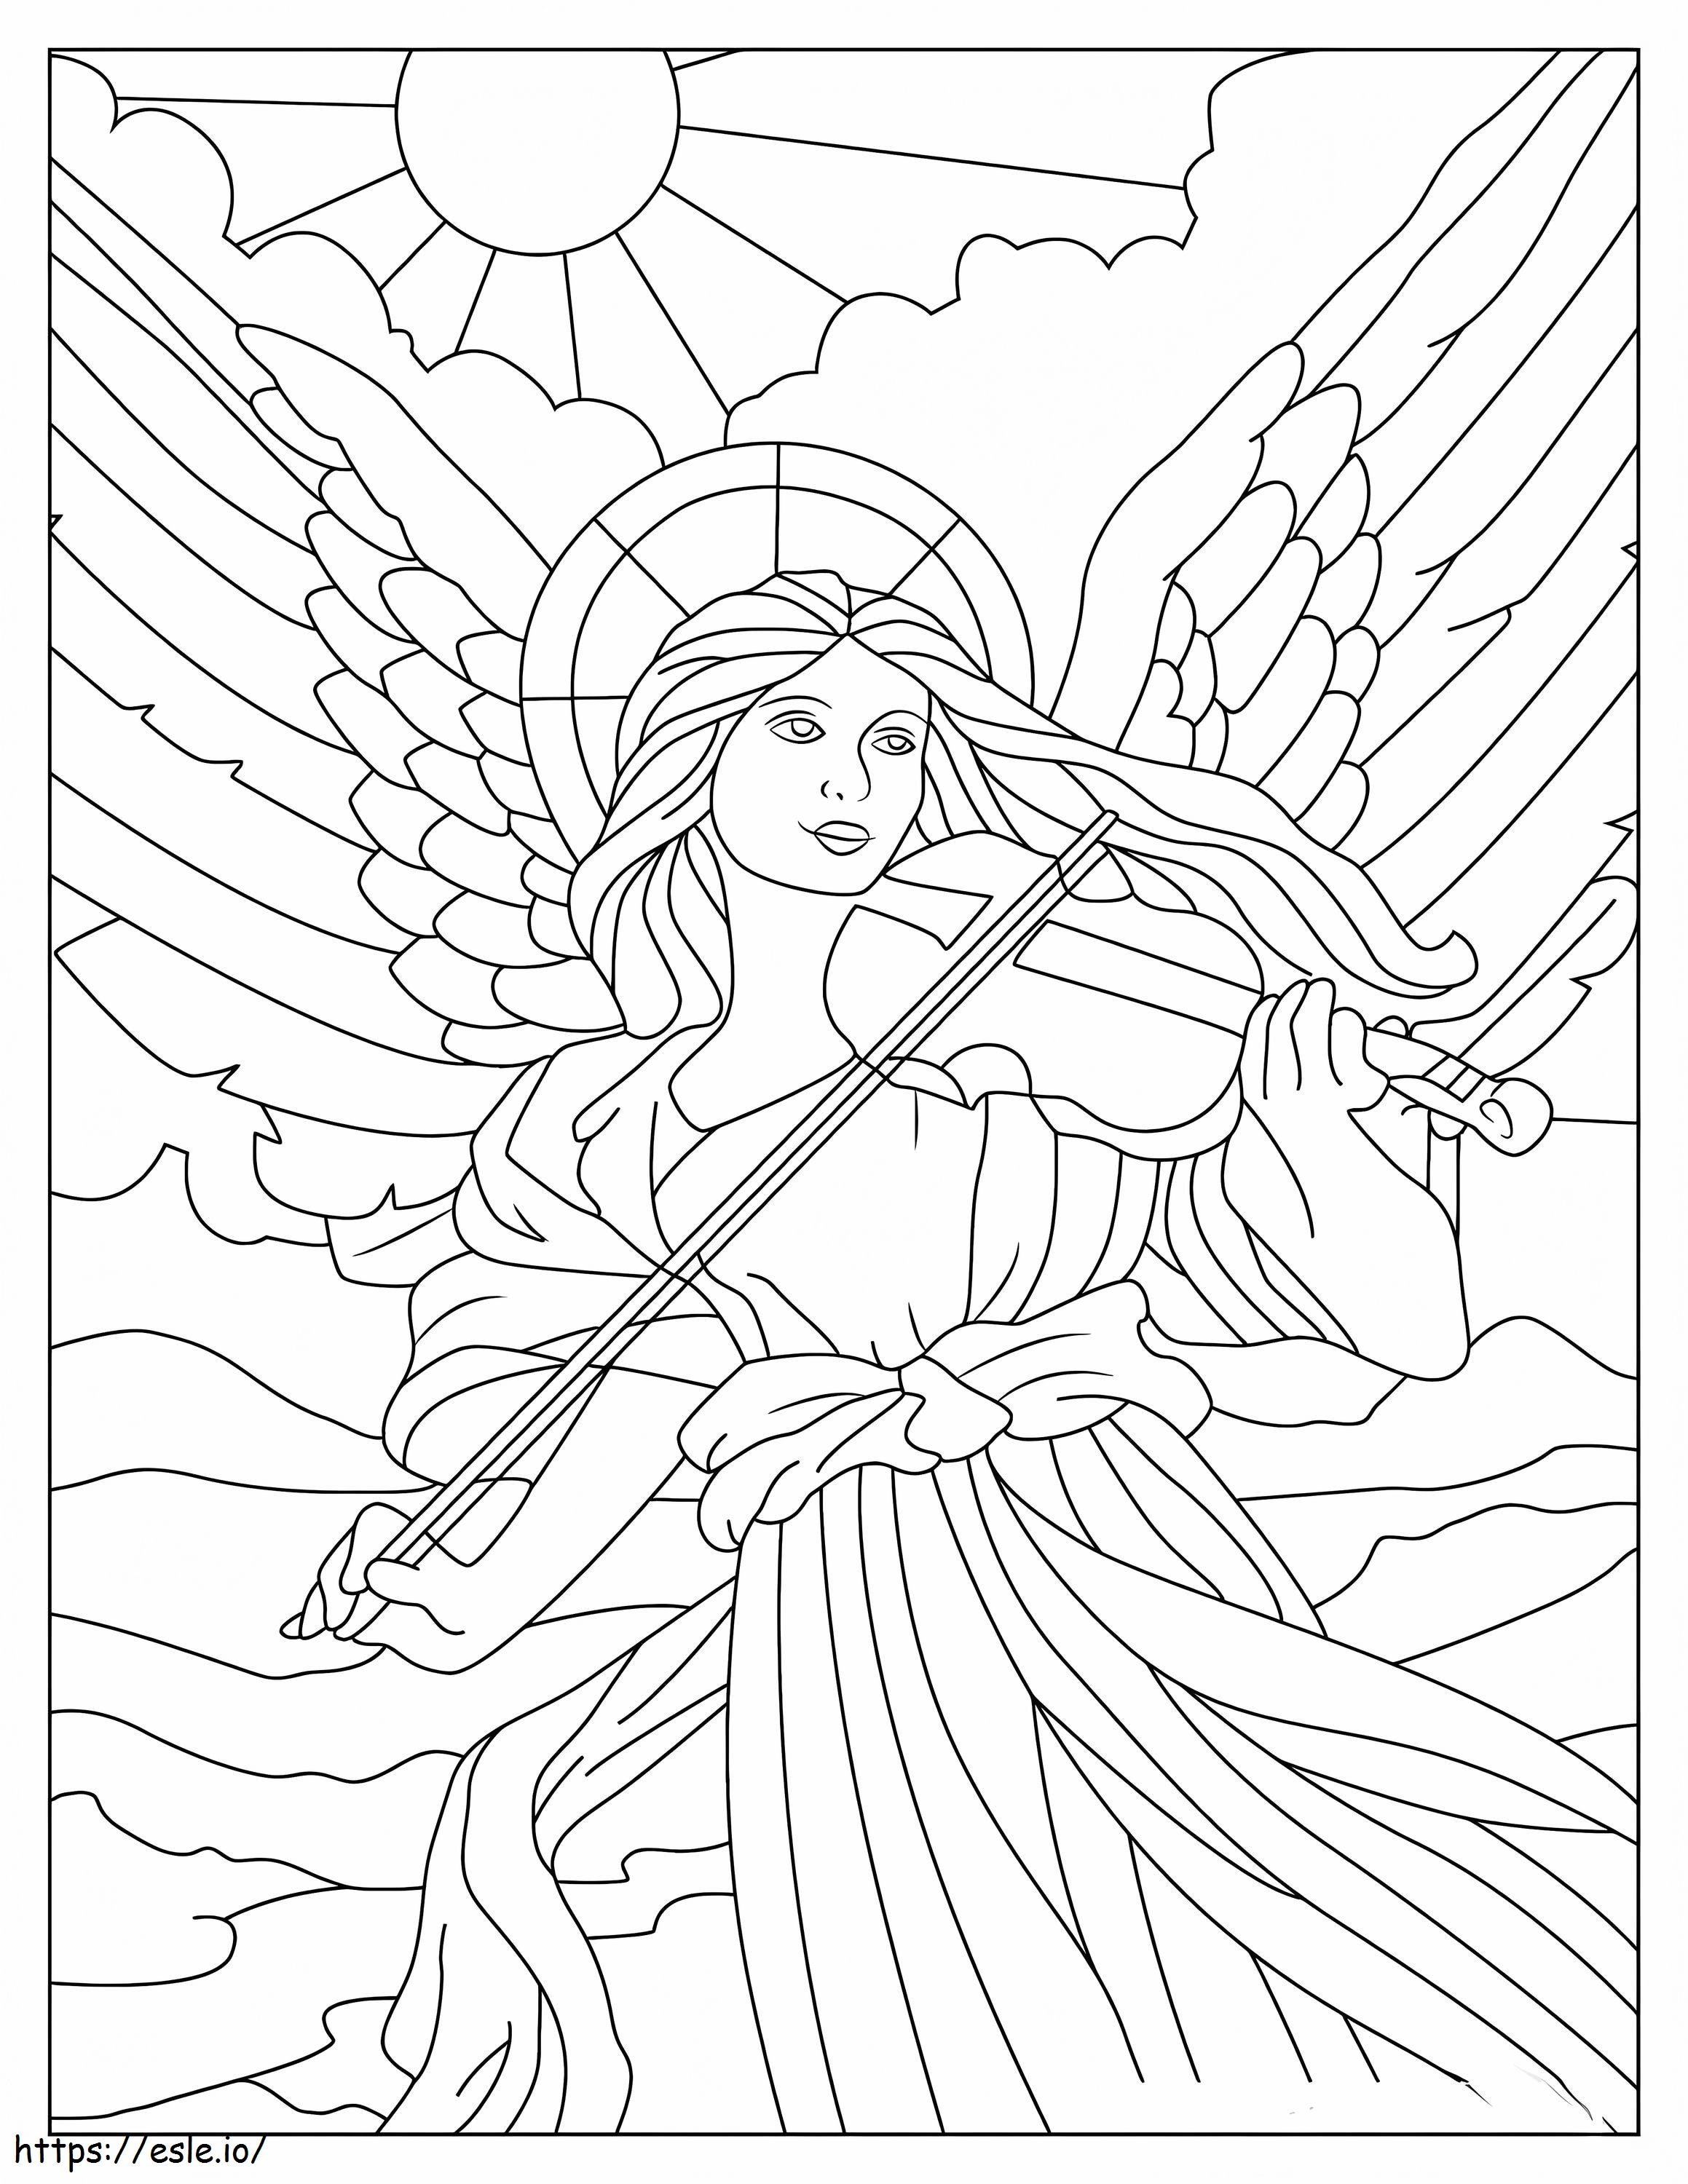 Angel Playing The Piano coloring page